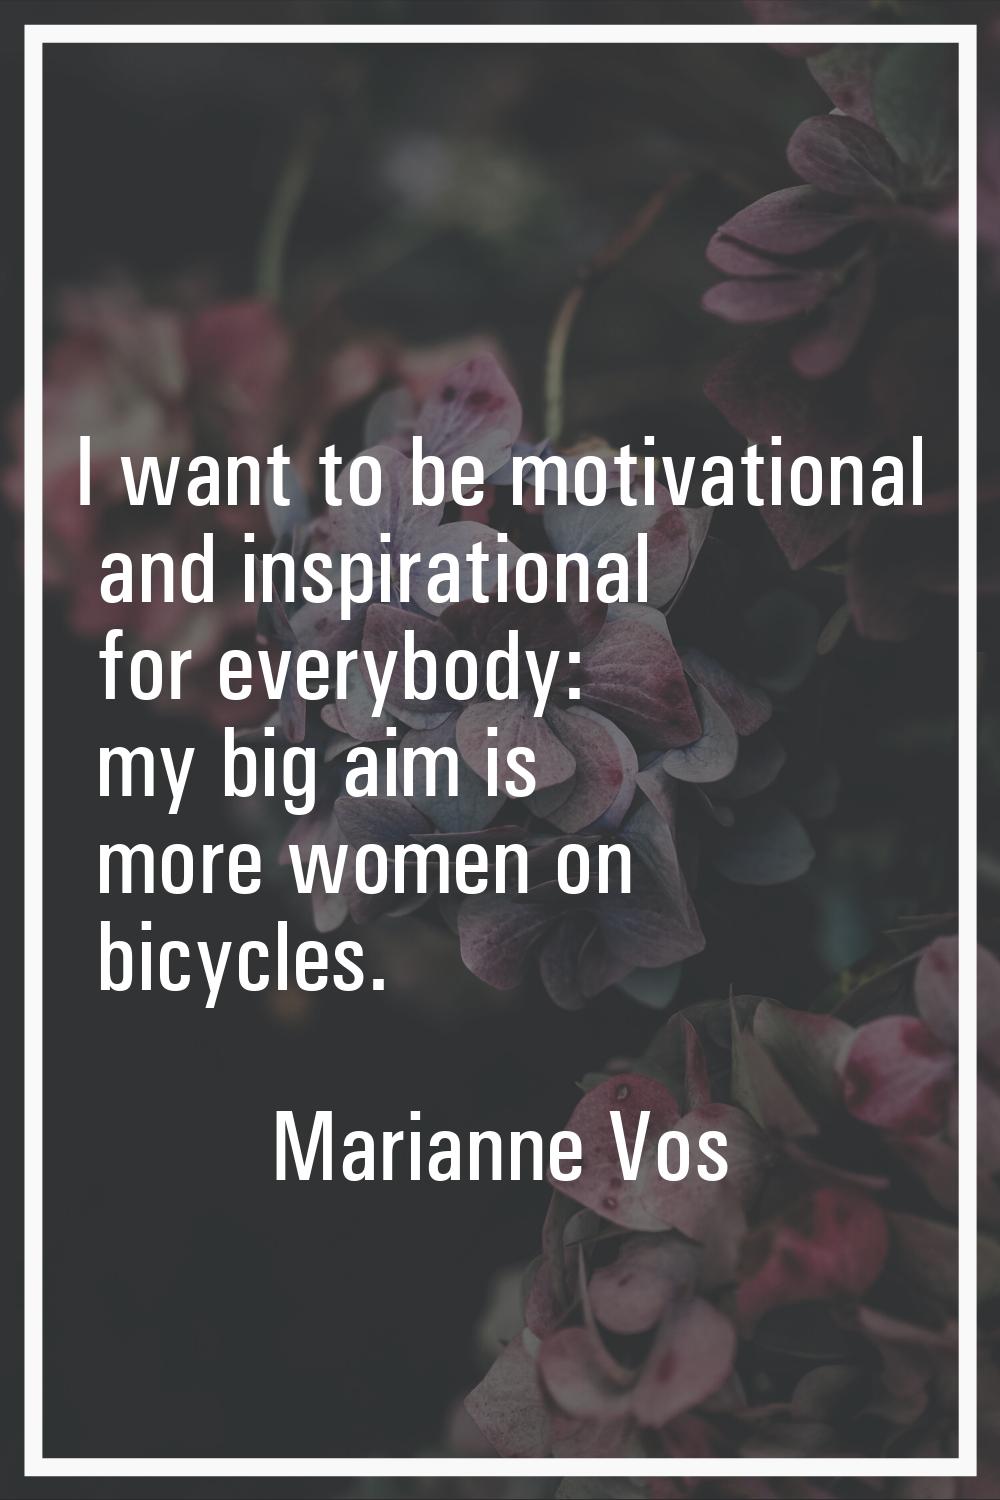 I want to be motivational and inspirational for everybody: my big aim is more women on bicycles.